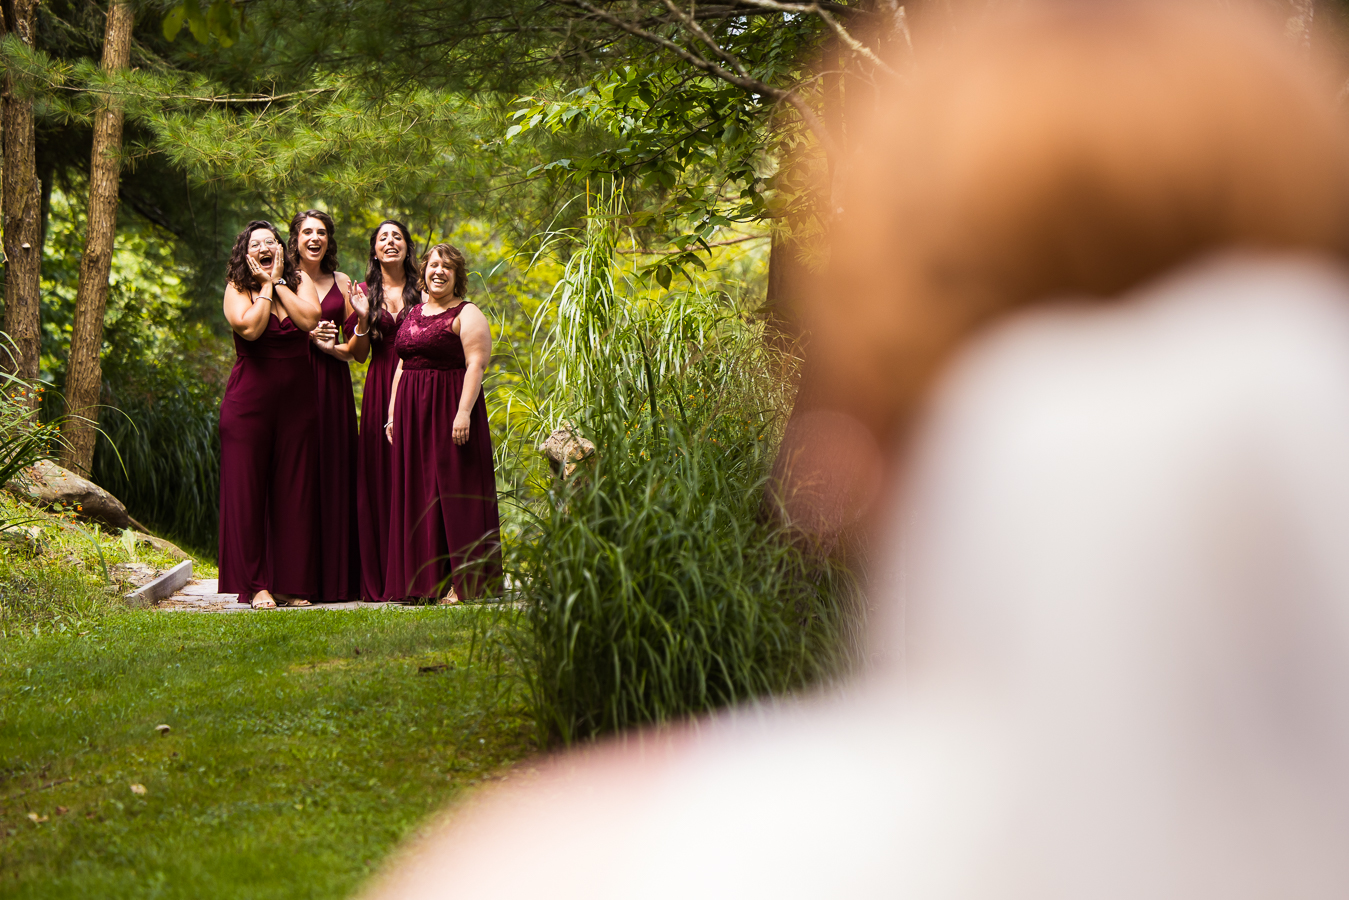 Oak Lodge Wedding Photographer, rhinehart photography, captures this outdoor first look with the bridesmaids who are smiling from ear to ear as they see the bride for the first time surrounded by greenery at this outdoor wedding 